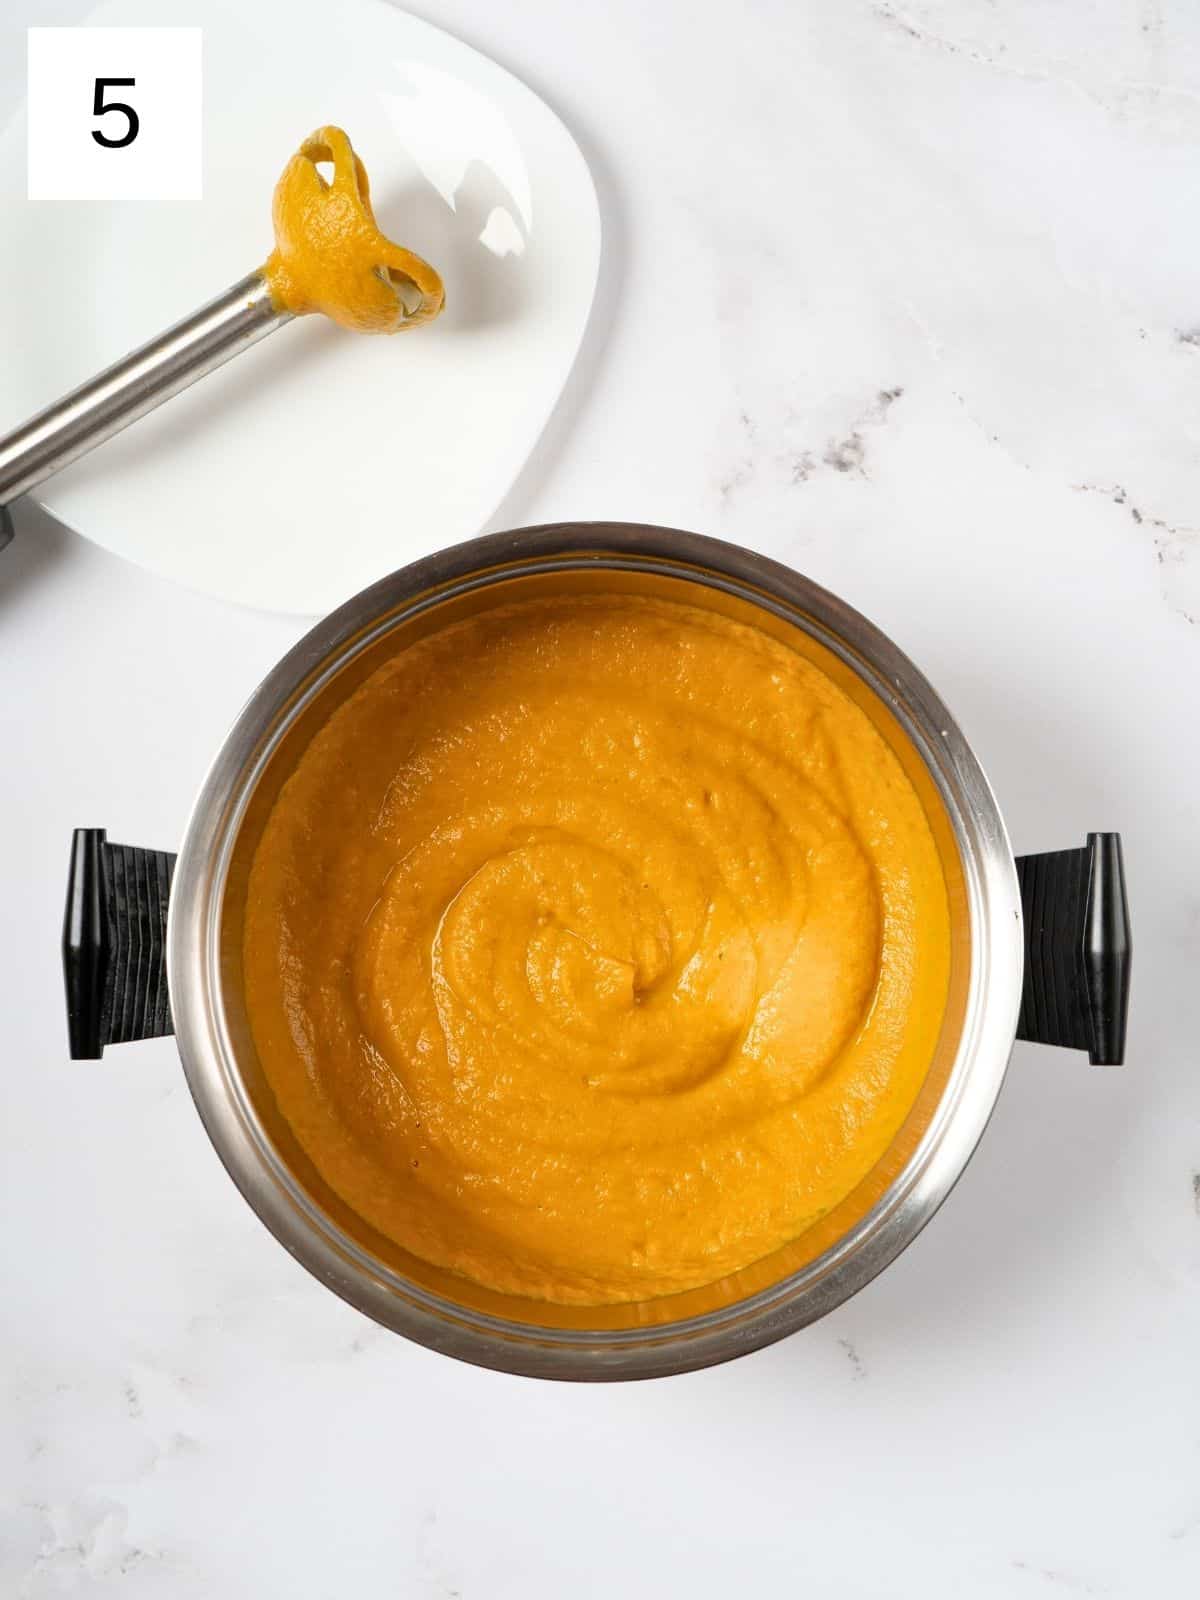 blended sweet potato and carrot soup using an immersion blender.